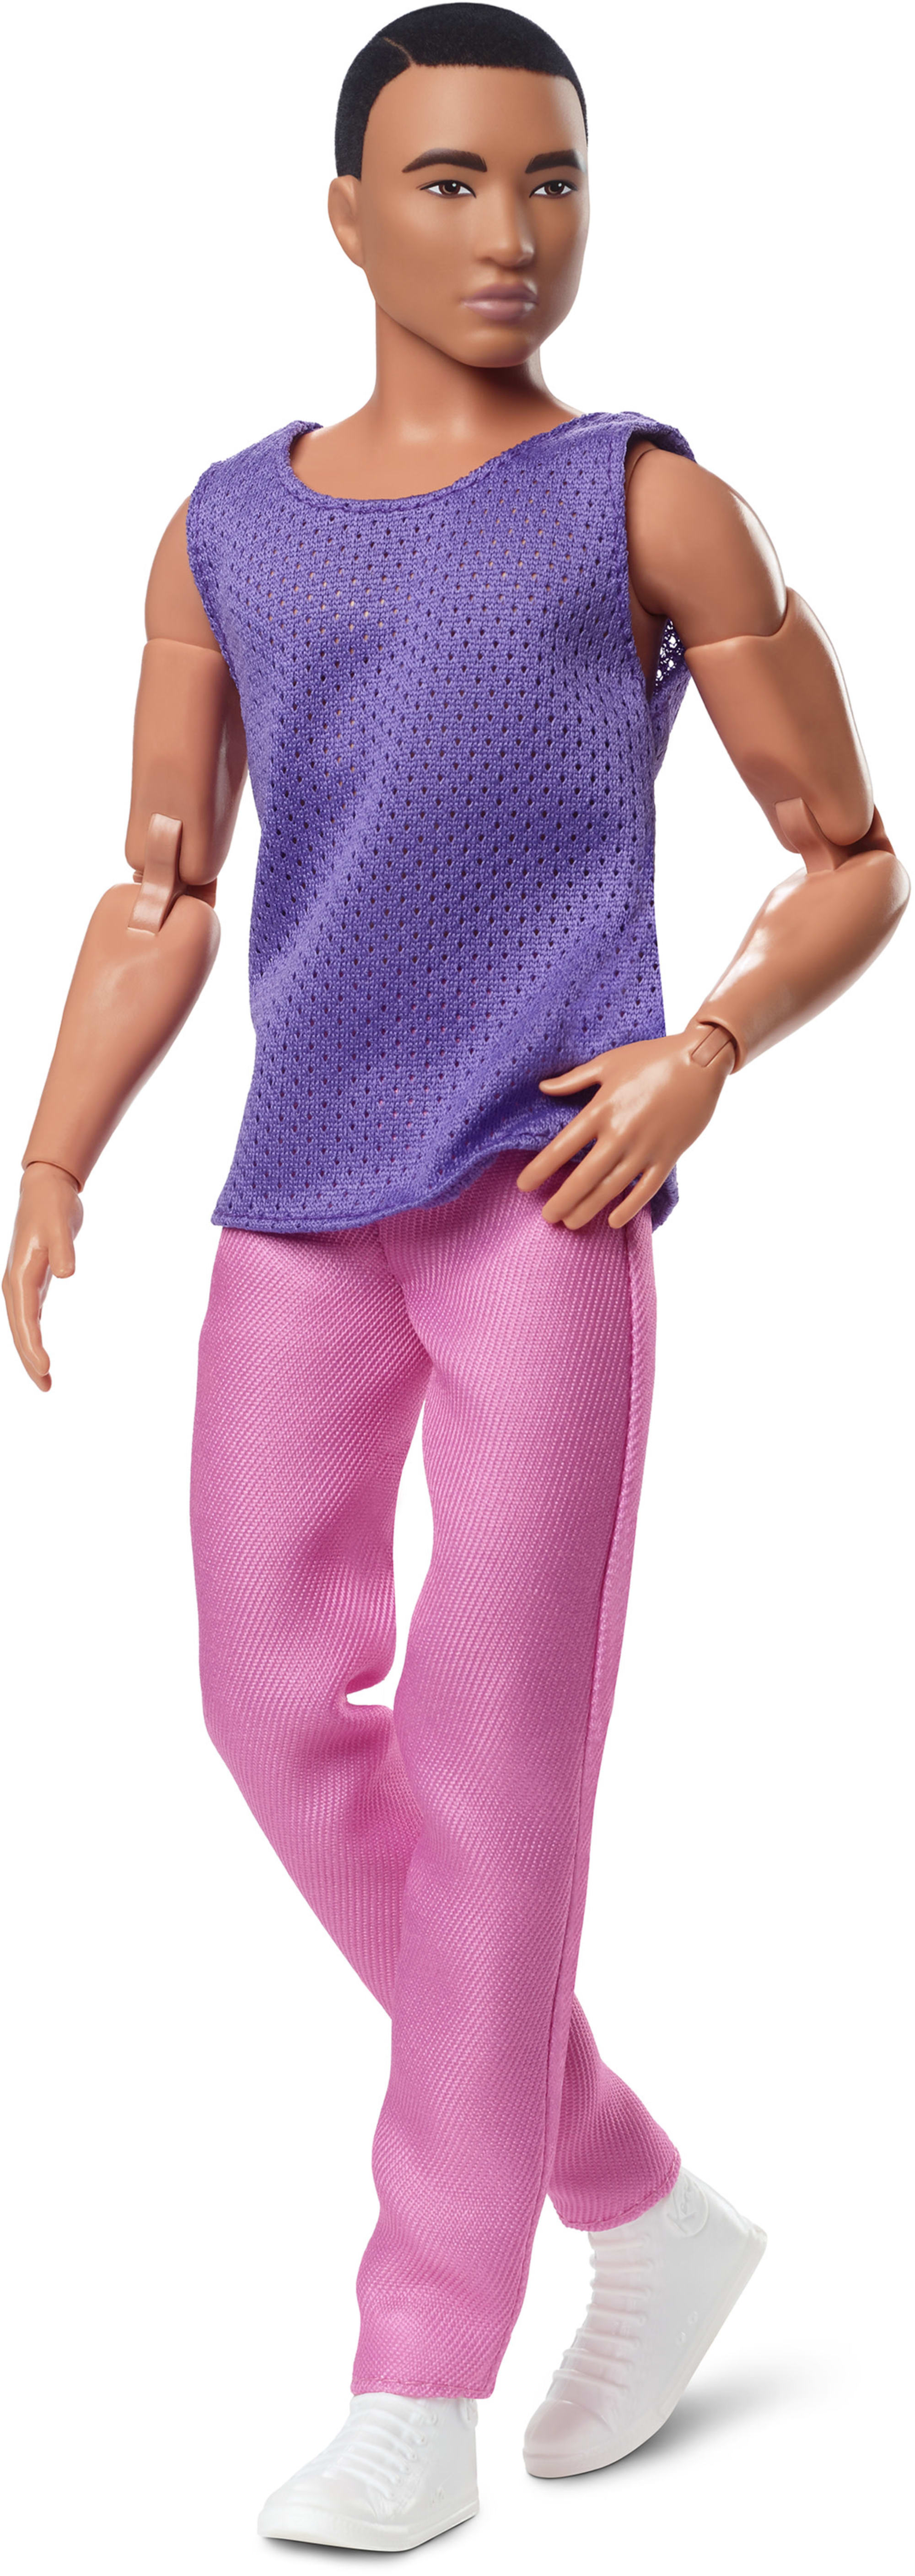 Ken Doll, Barbie Looks, Pink and Purple Outfit